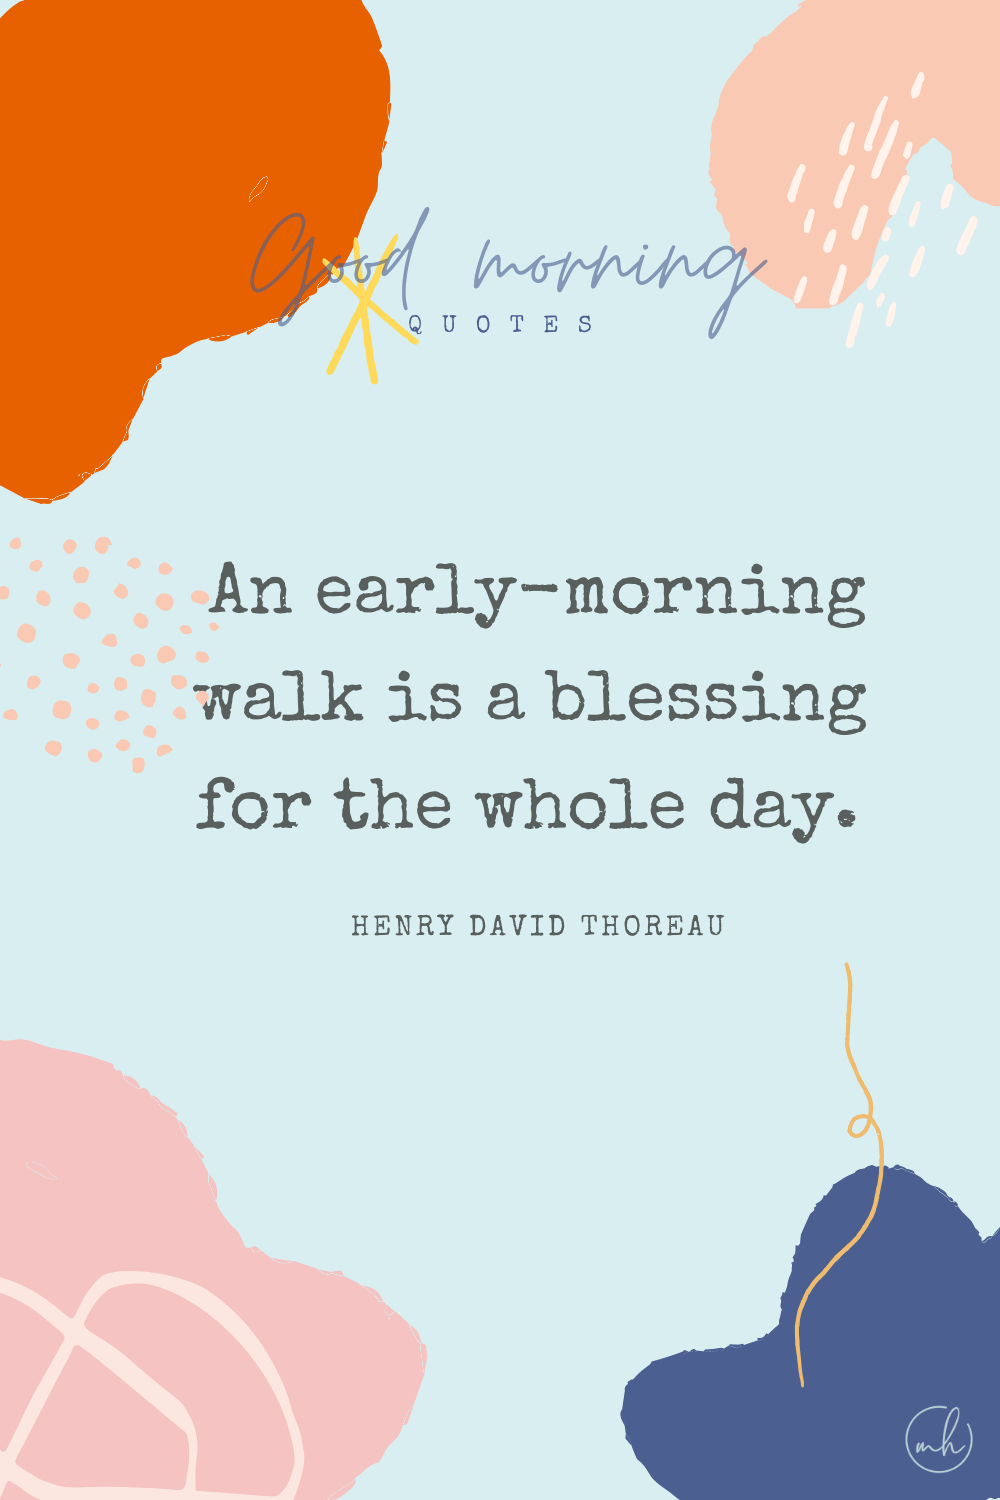 "An early-morning walk is a blessing for the whole day." – Henry David Thoreau